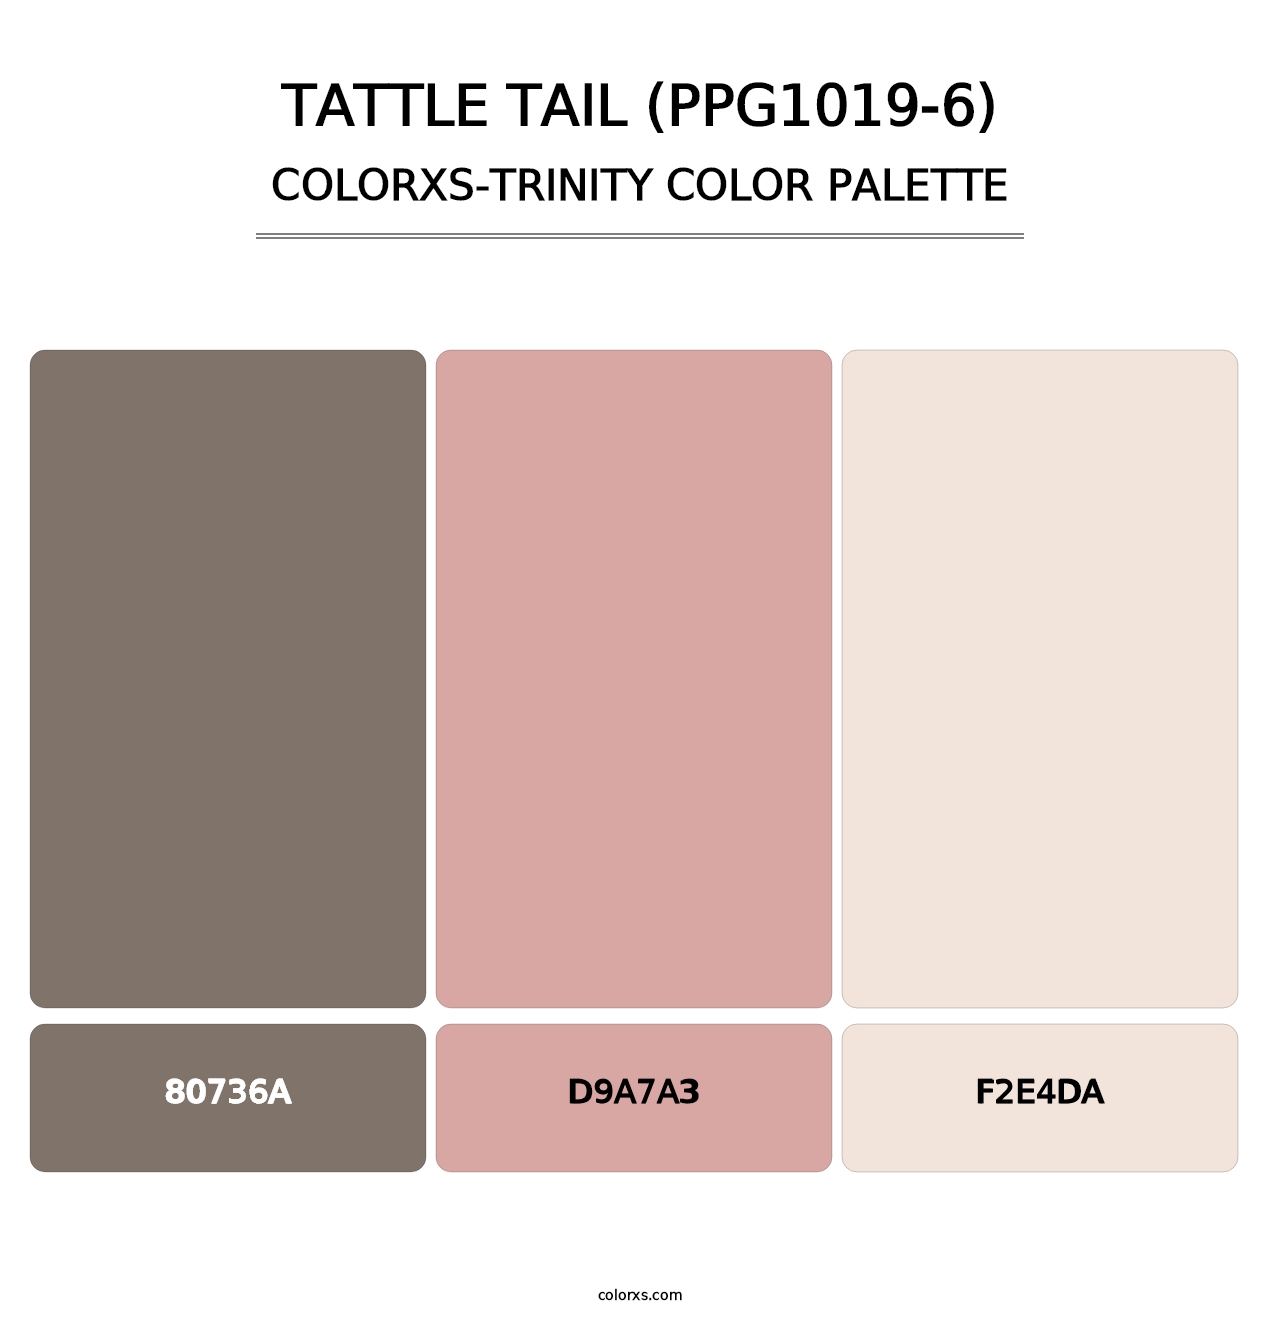 Tattle Tail (PPG1019-6) - Colorxs Trinity Palette